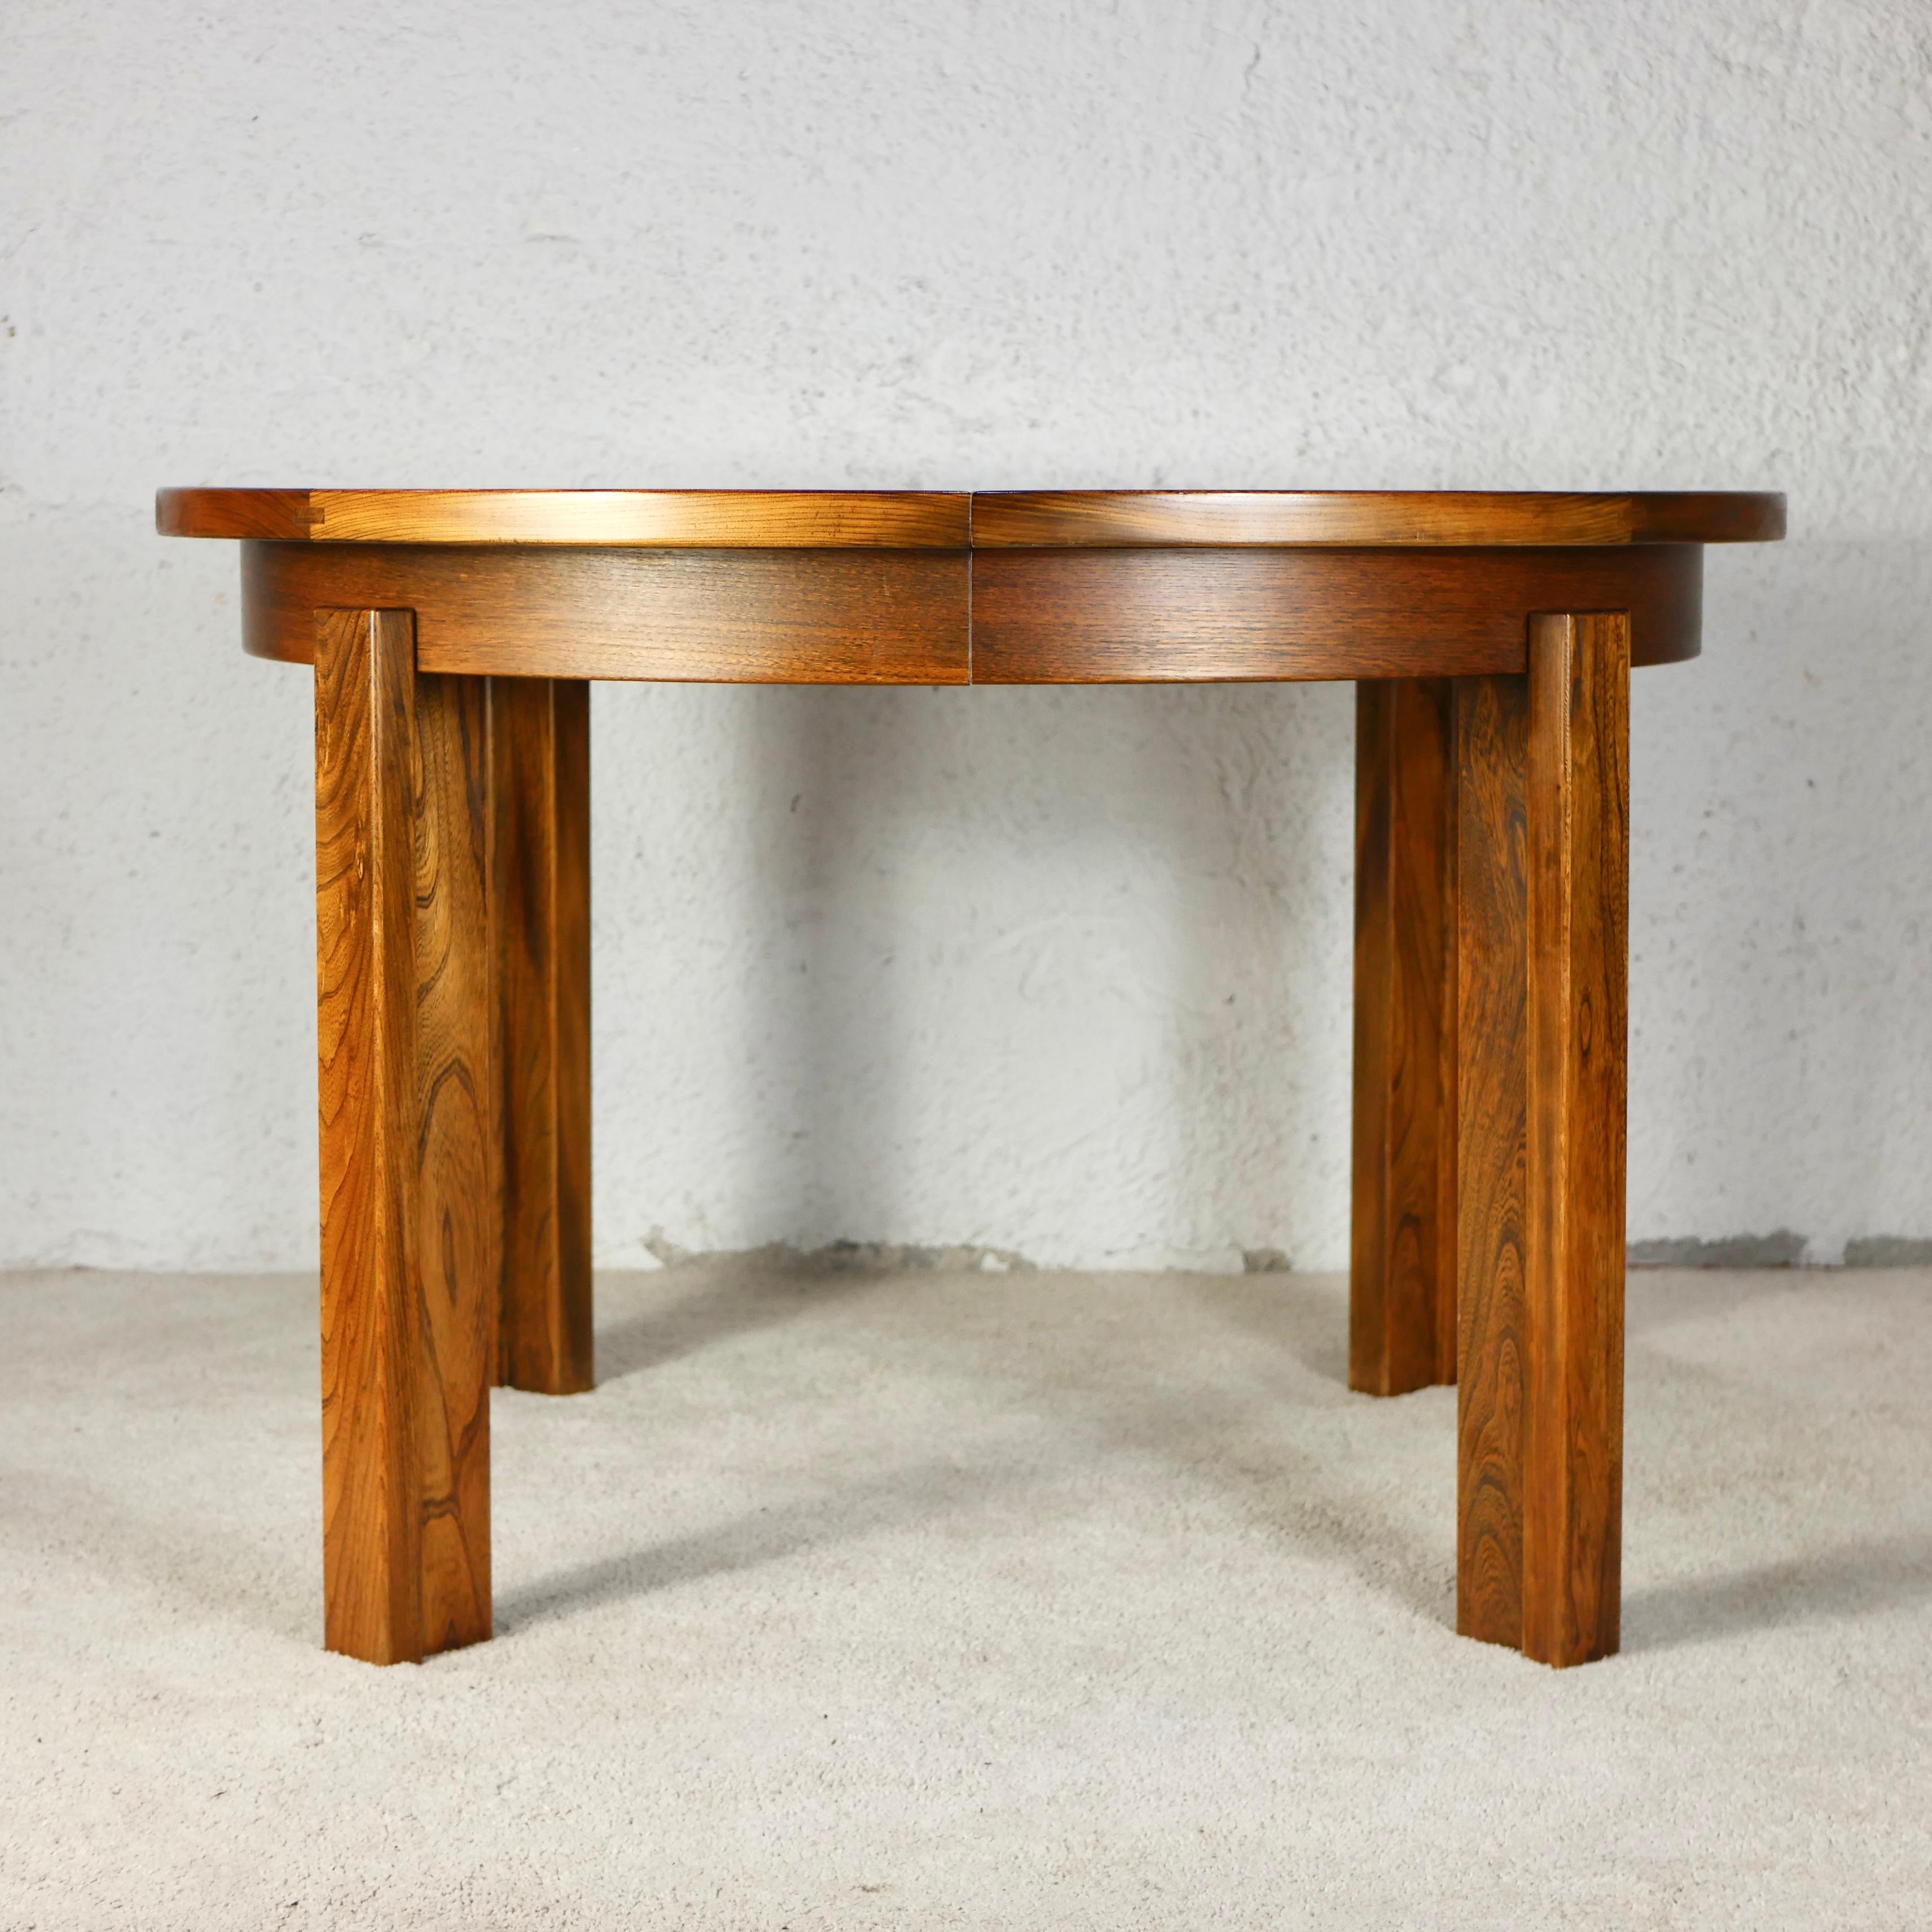 Beautiful solid elm table made by Maison Regain in France during the late 1970s.
It has two extensions, and goes from 115cm width to 203cm, for 4-8 people.
Nice wood grain and patina, beautiful making details, very sturdy and practical.
Very good